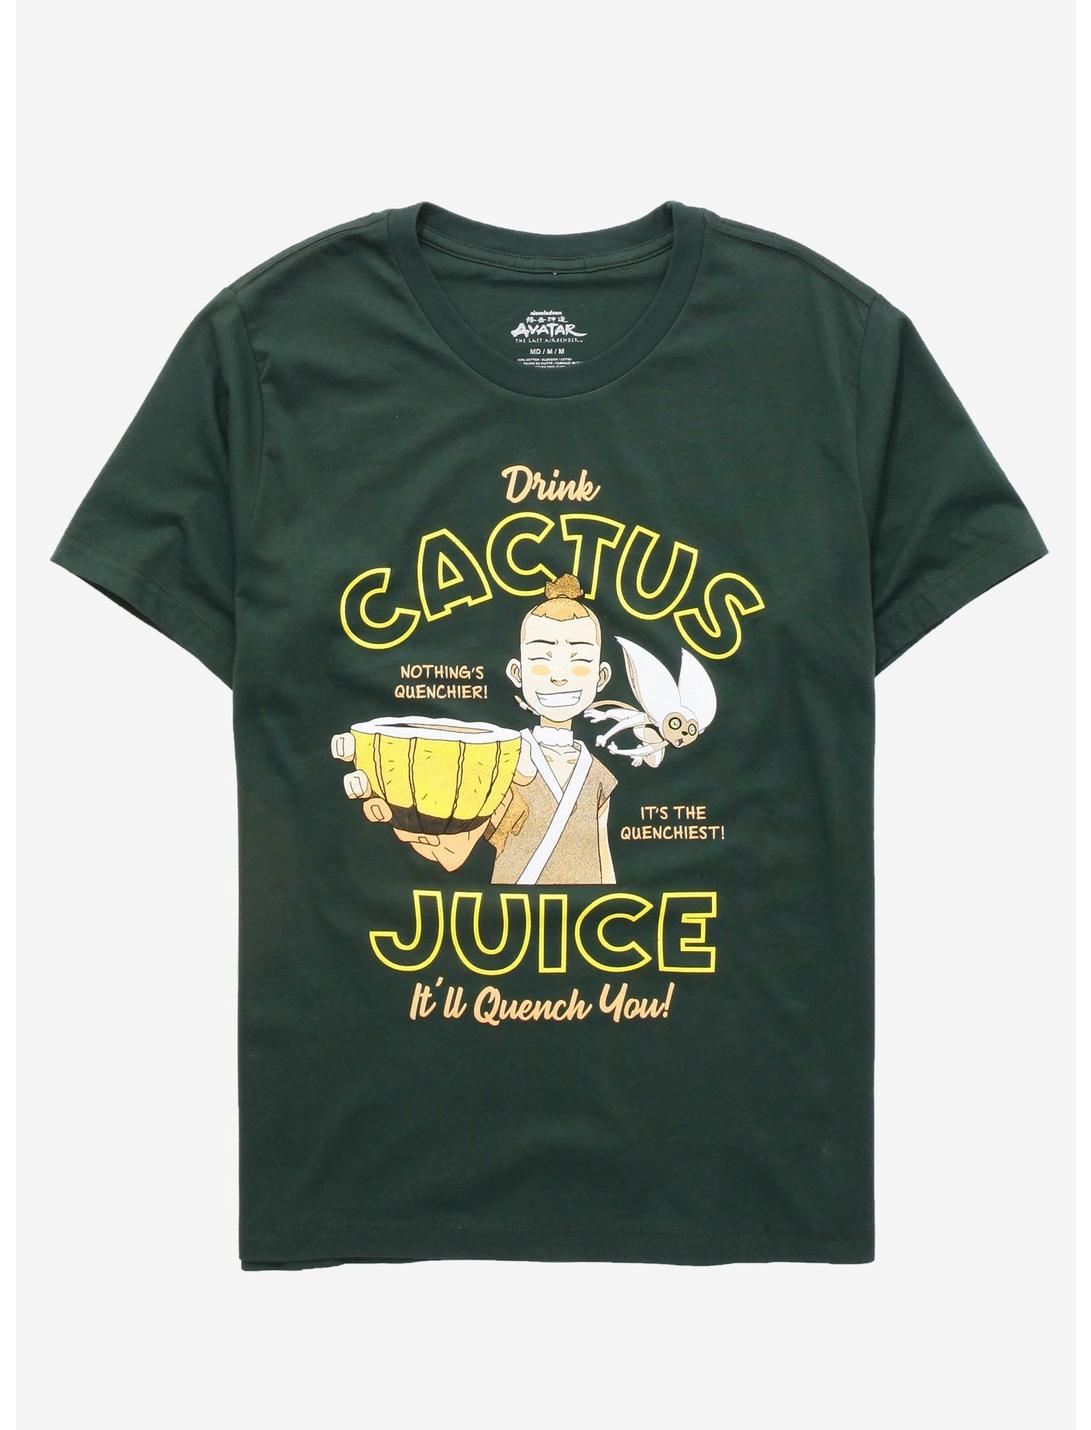 Avatar: The Last Airbender Drink Cactus Juice T-Shirt - BoxLunch Exclusive, DARK GREEN, hi-res